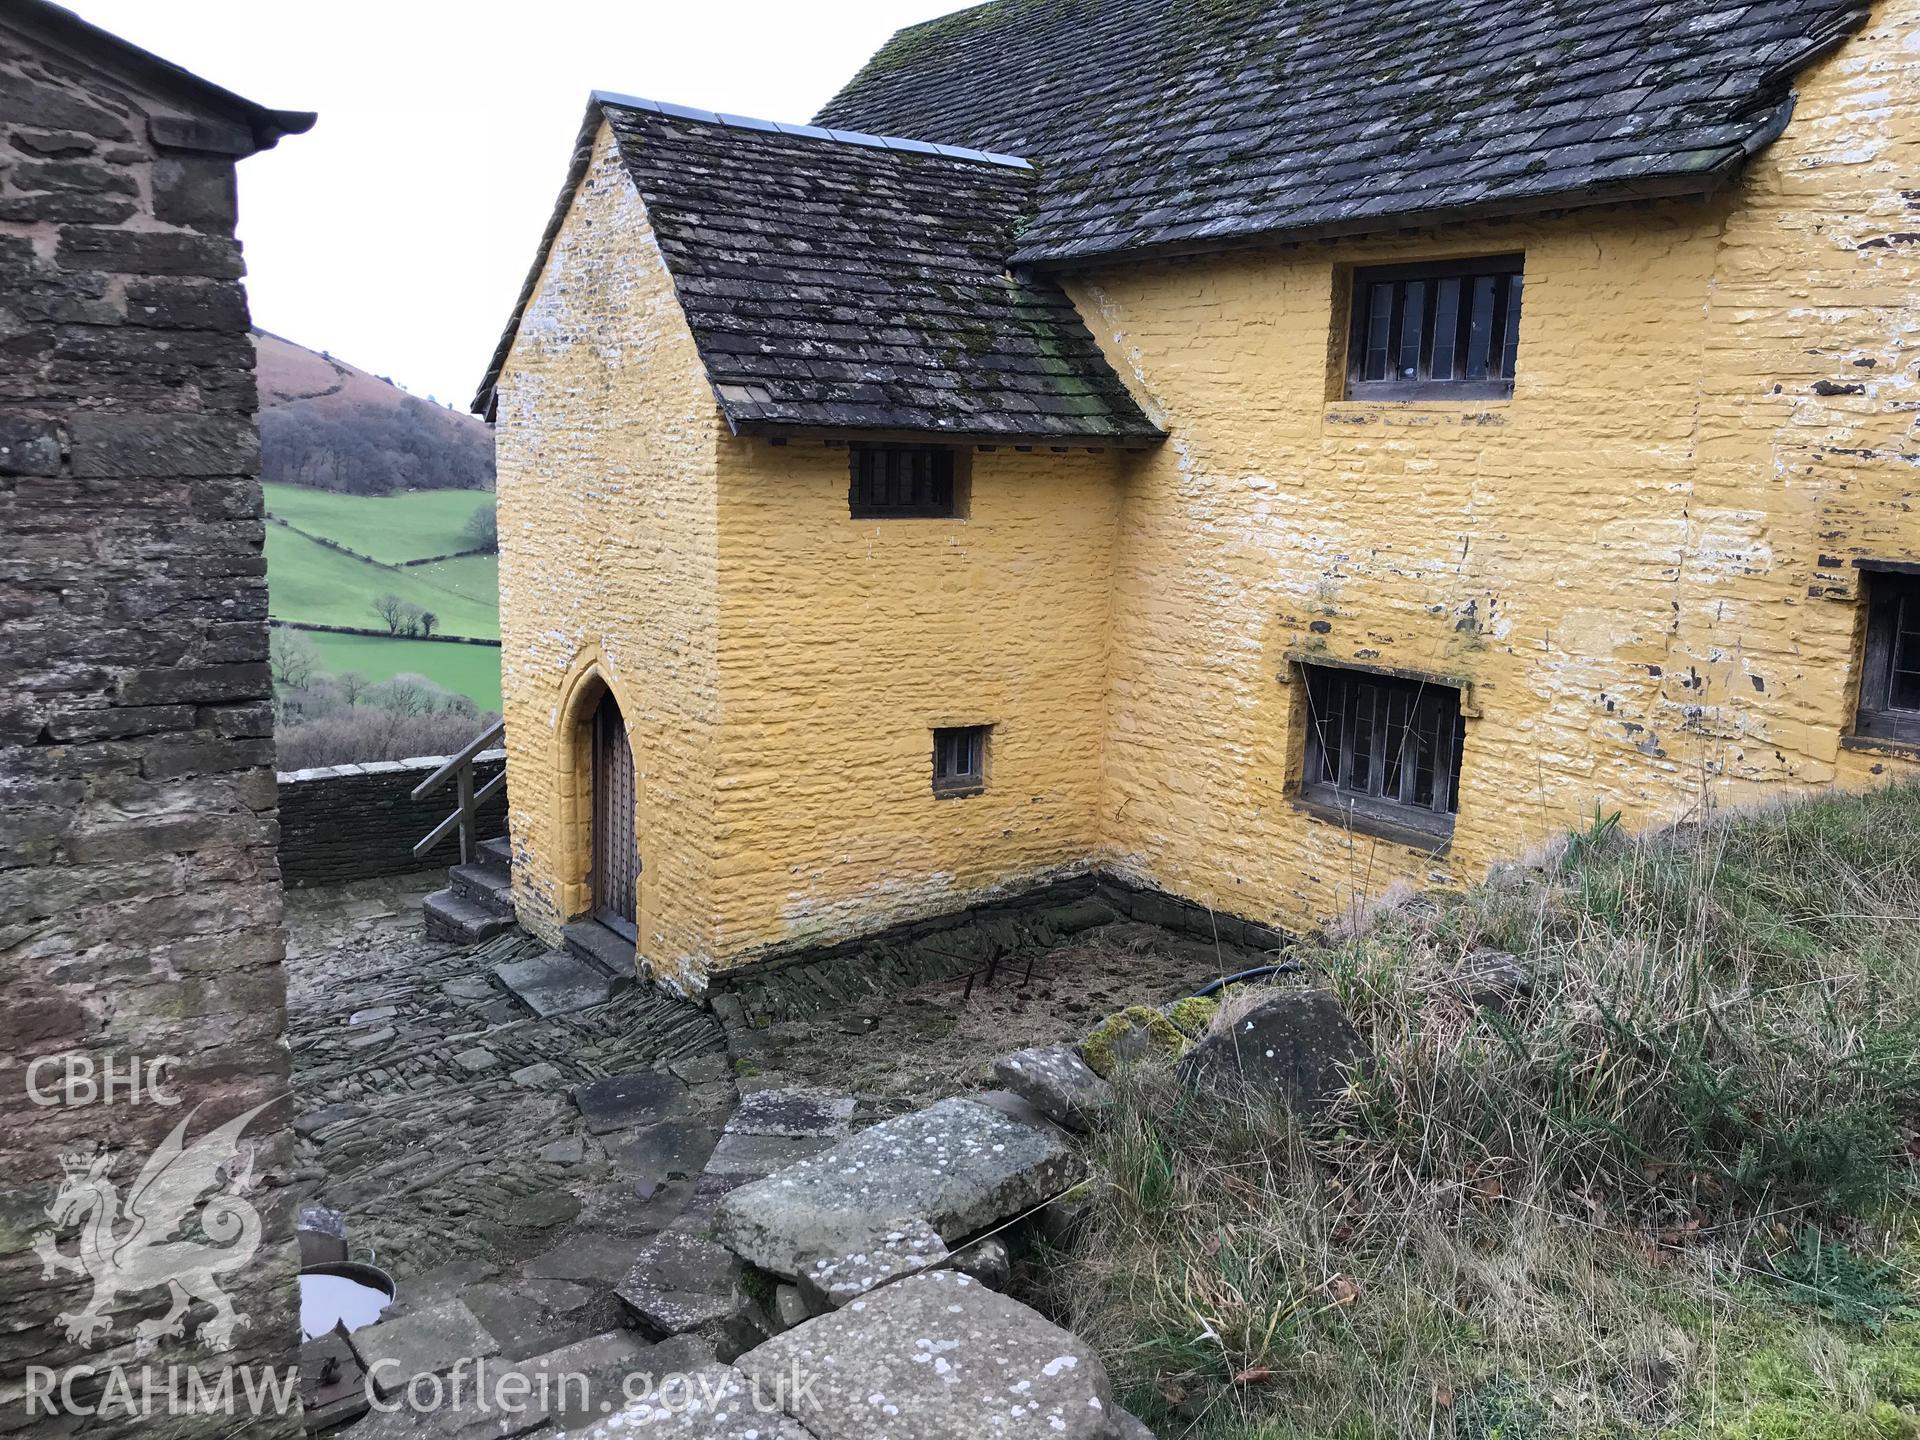 Exterior view of Ty-Hwnt-y-Bwlch, Crucorney. Colour photograph taken by Paul R. Davis on 1st January 2019.